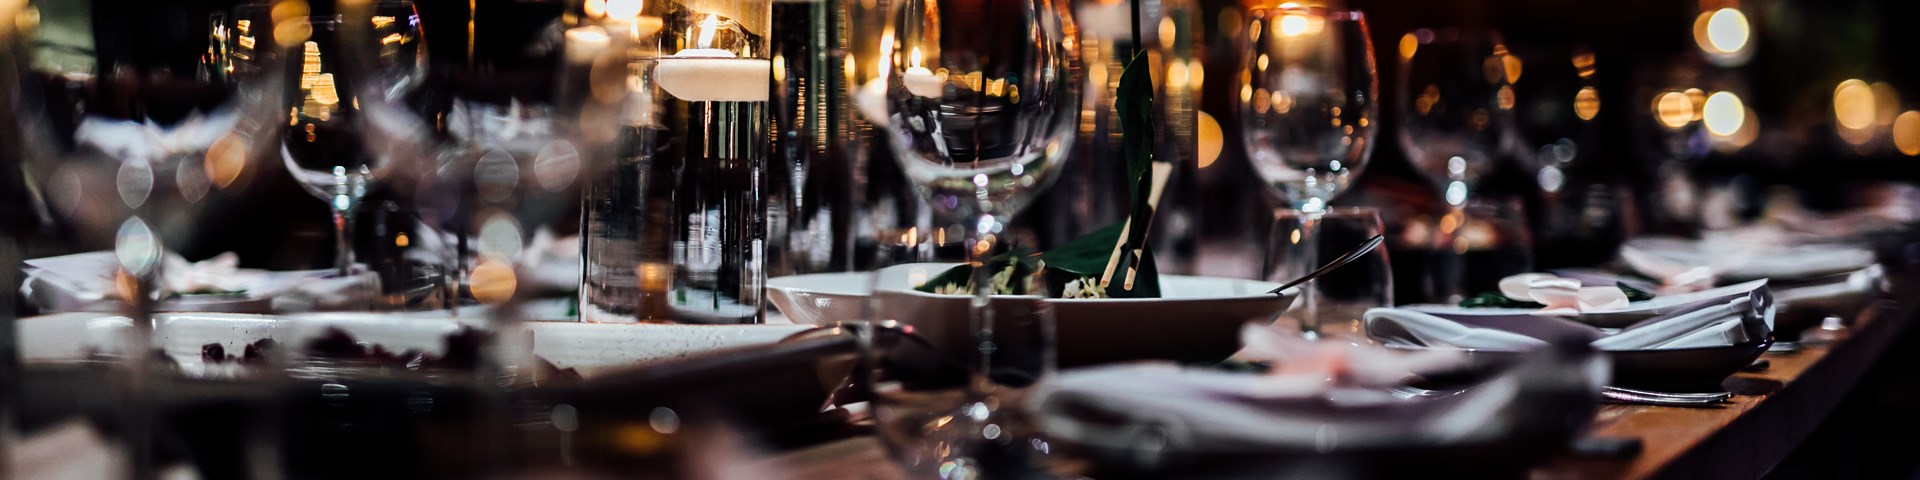 Dressed table in a restaurant with wine and champagne glasses